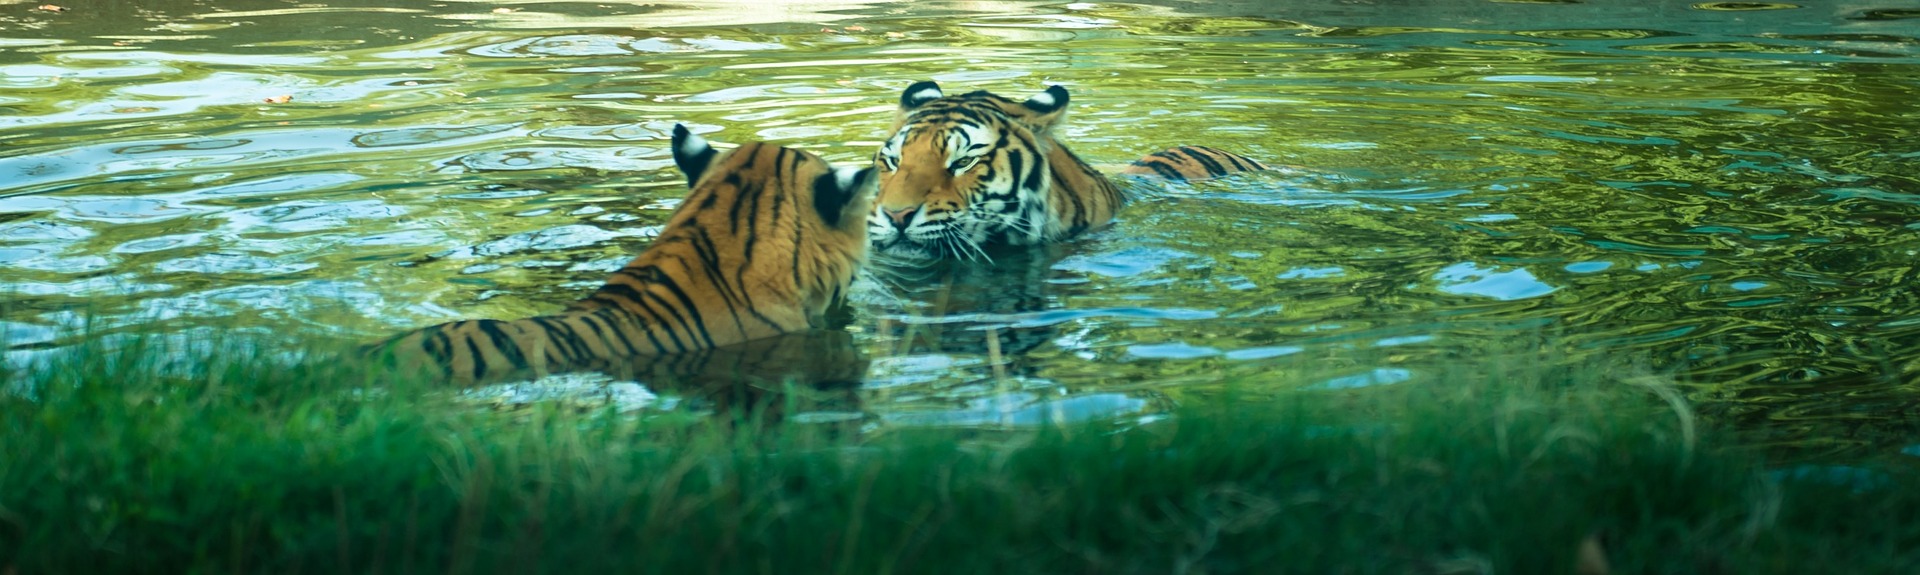 tigers playing